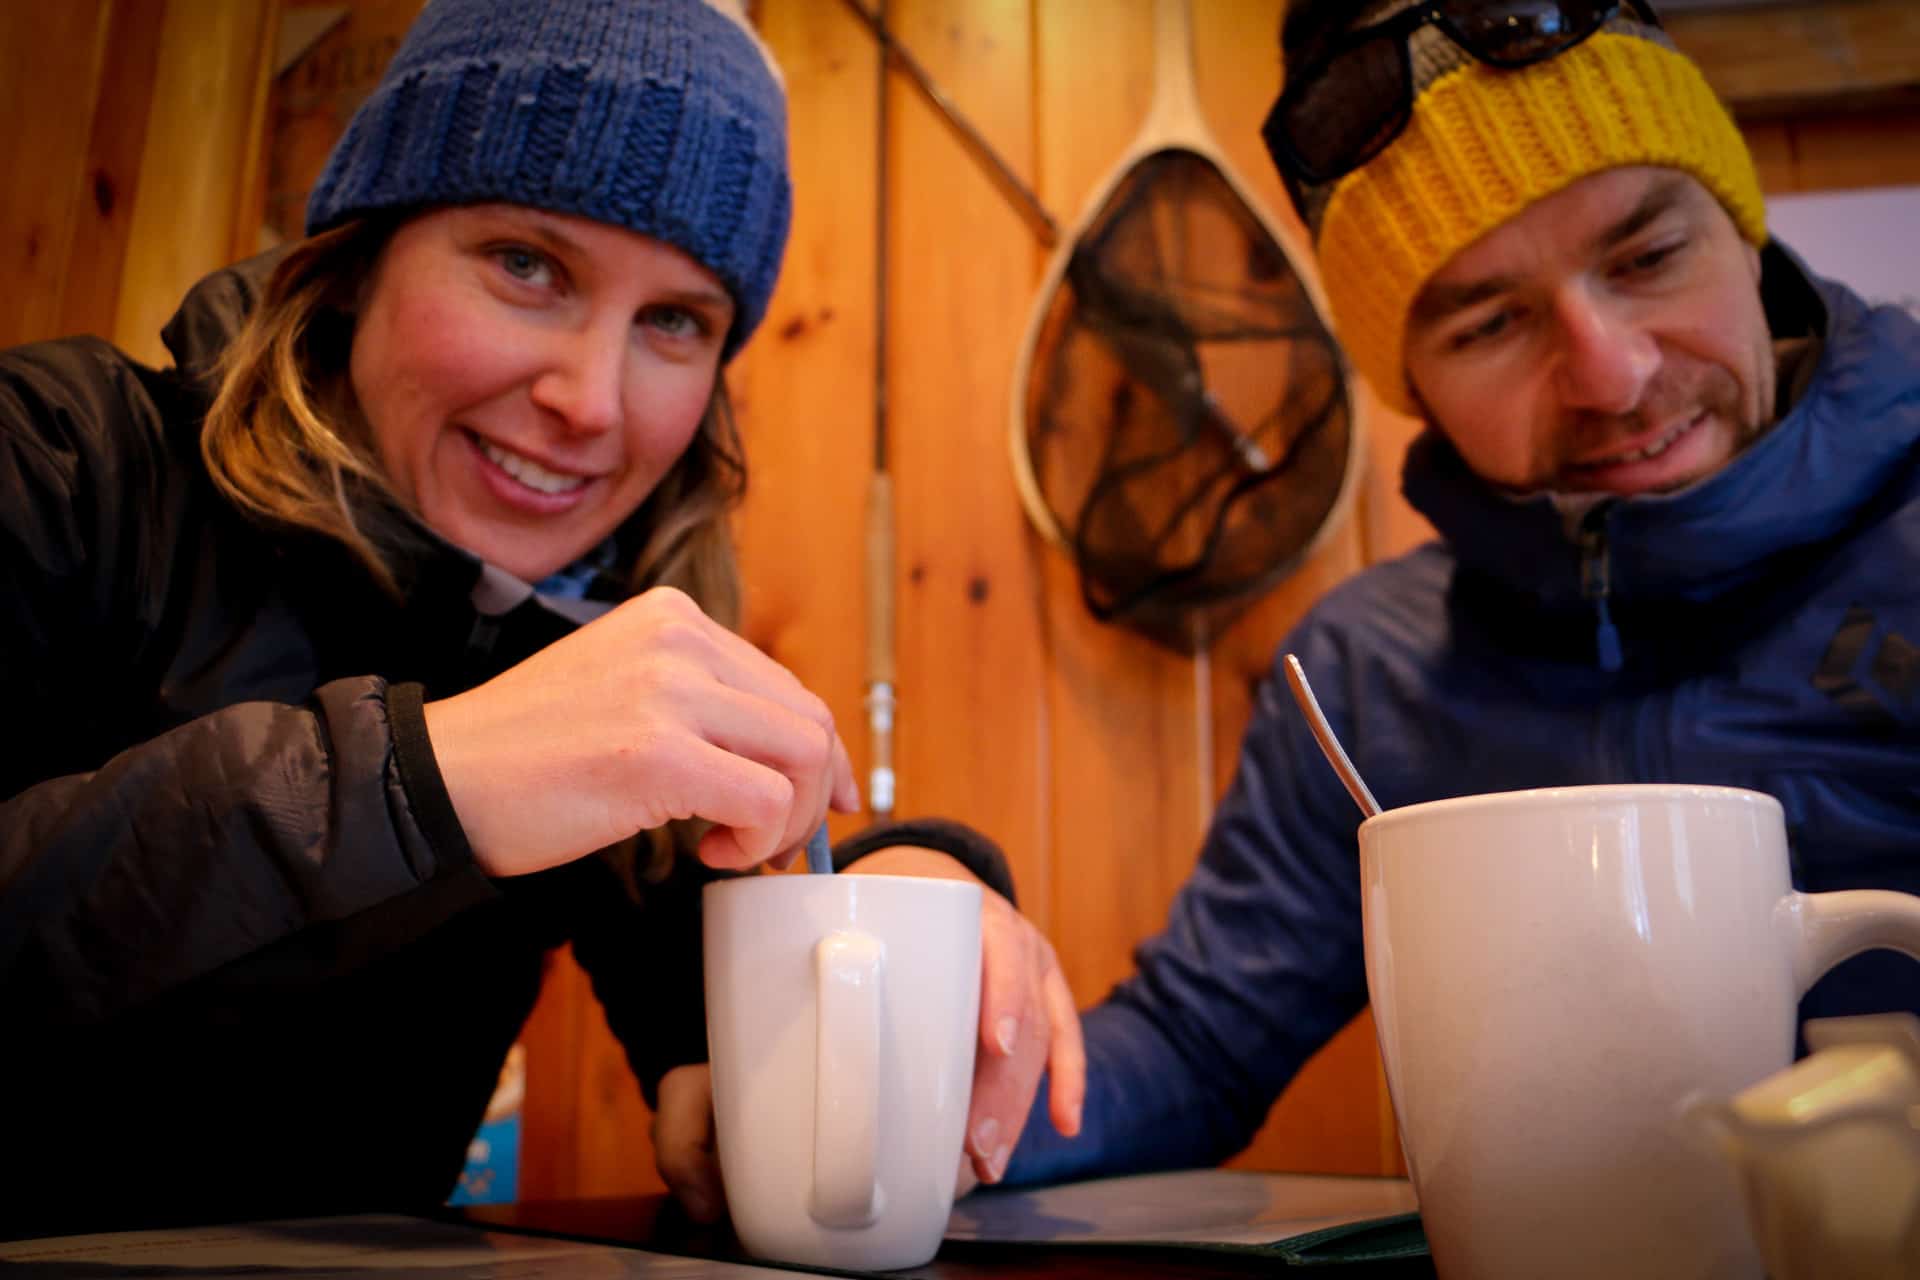 Afemale and a male smiling and drinking coffee after a fatbike ride